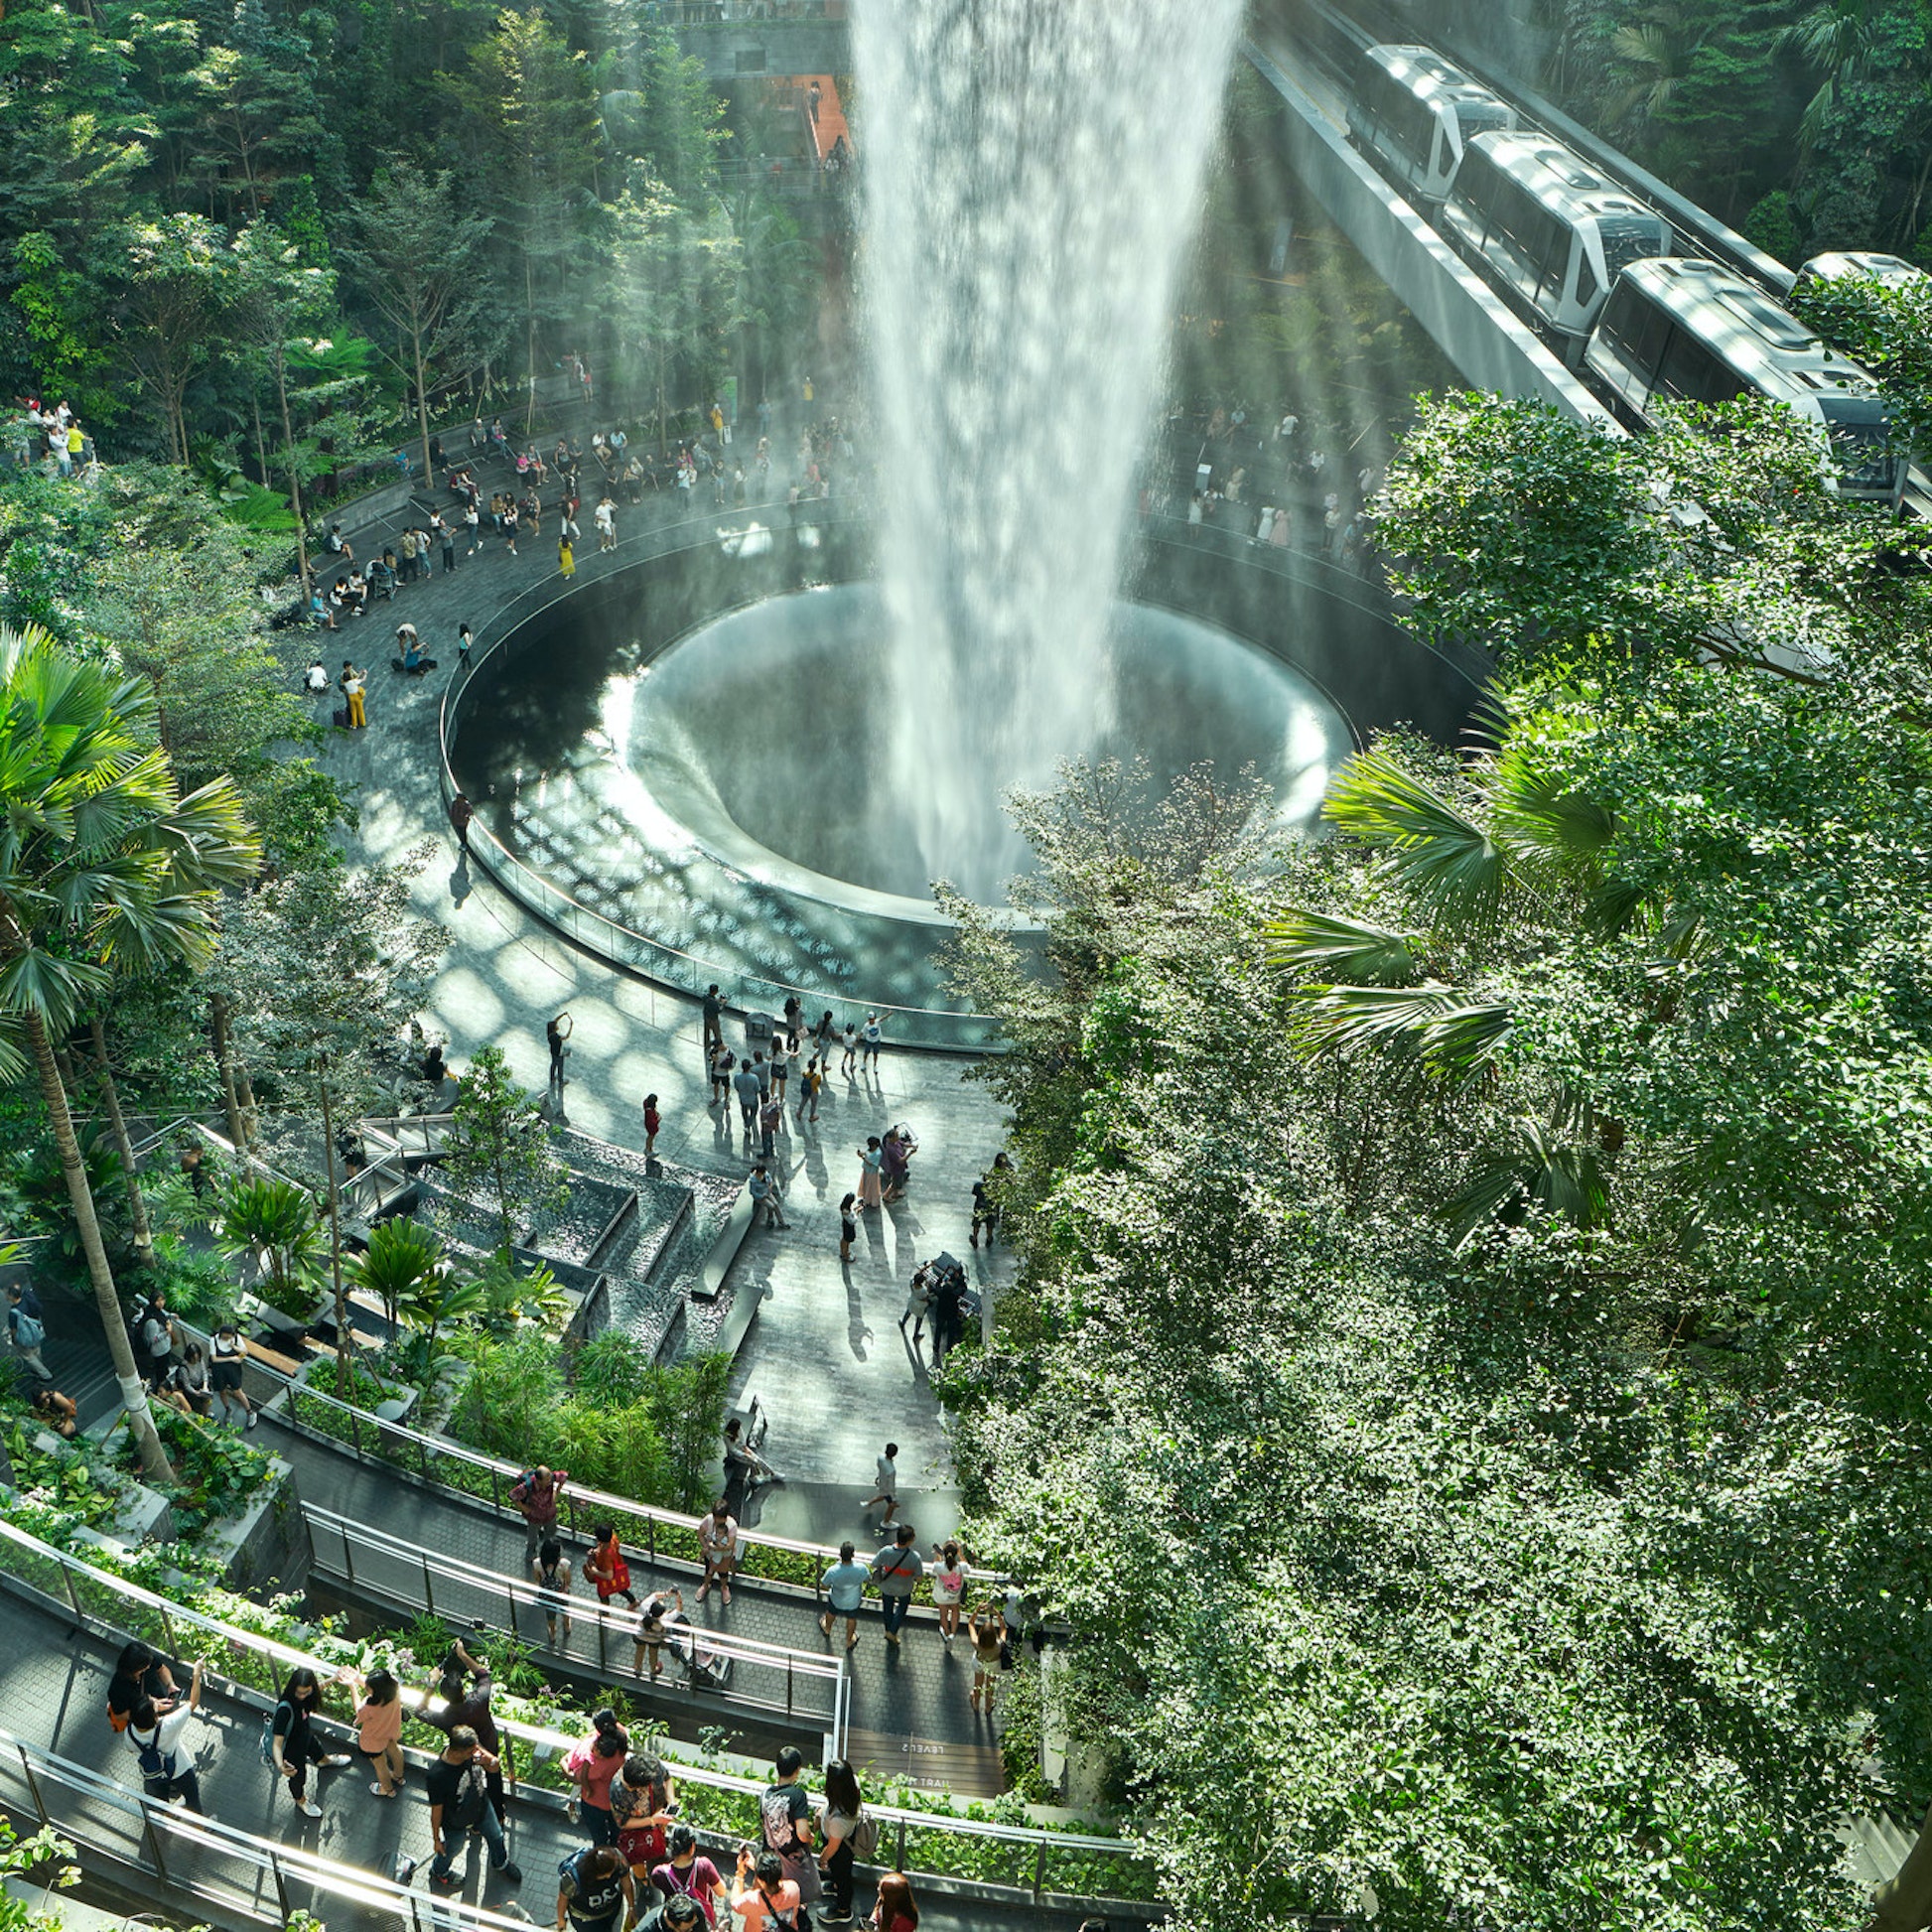 Singapore as an Example of Green Urbanism